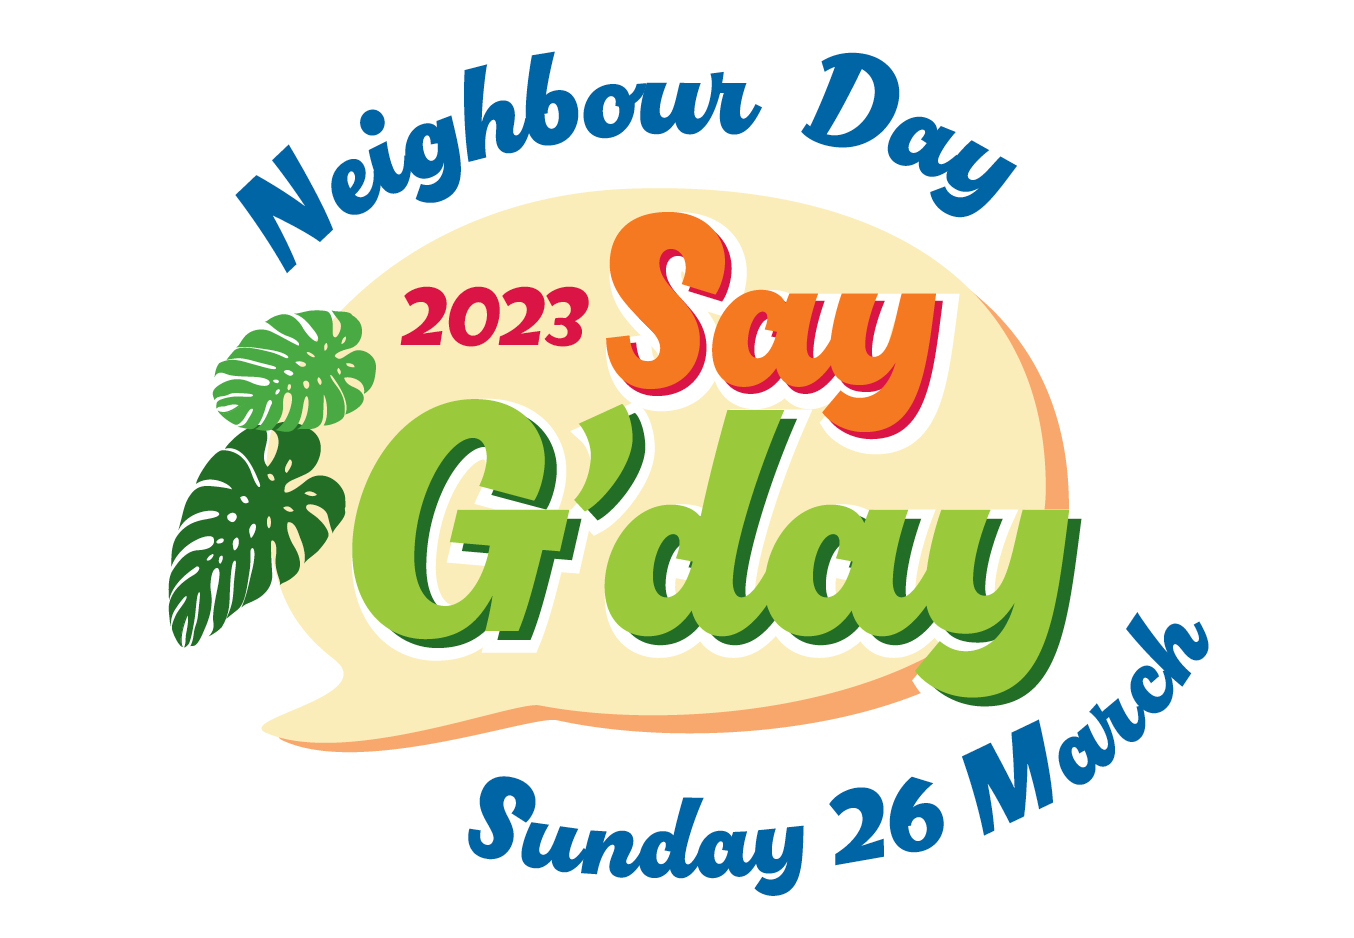 Neighbour Day 2023 is held on 26 March 2023